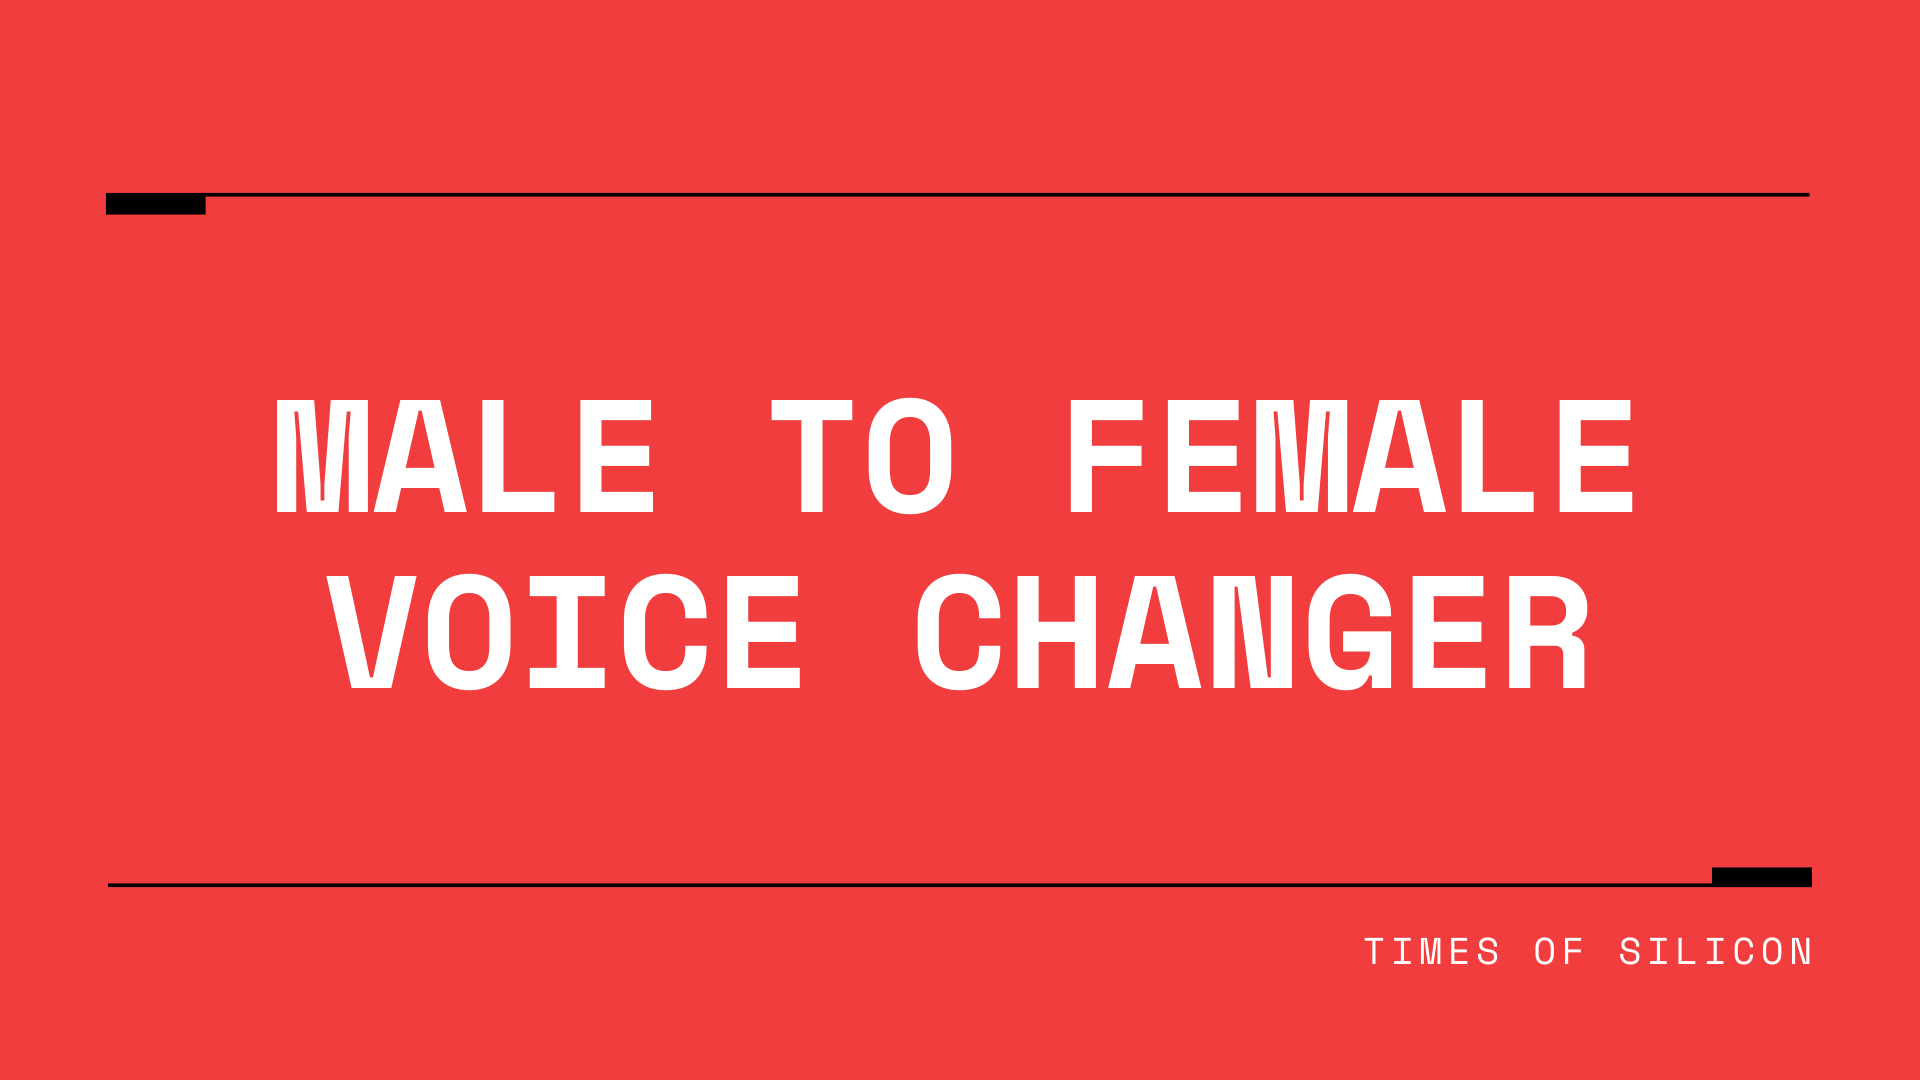 Male to Female voice changer